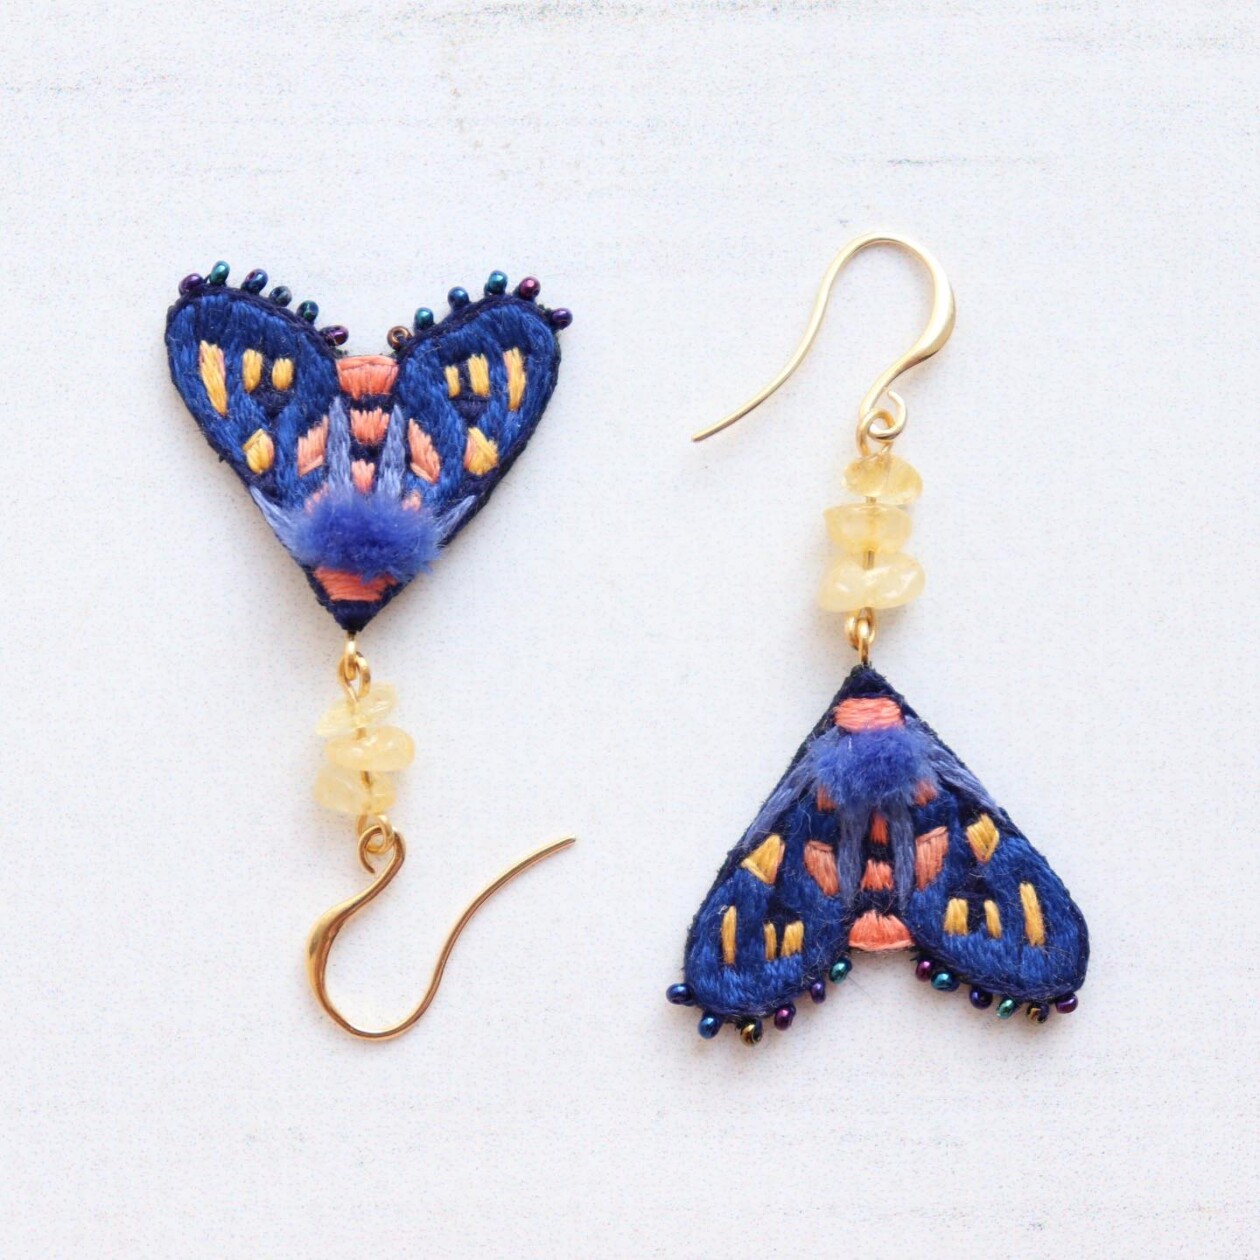 Eye Catching Handmade Embroidered Earrings By Vivaembr (8)